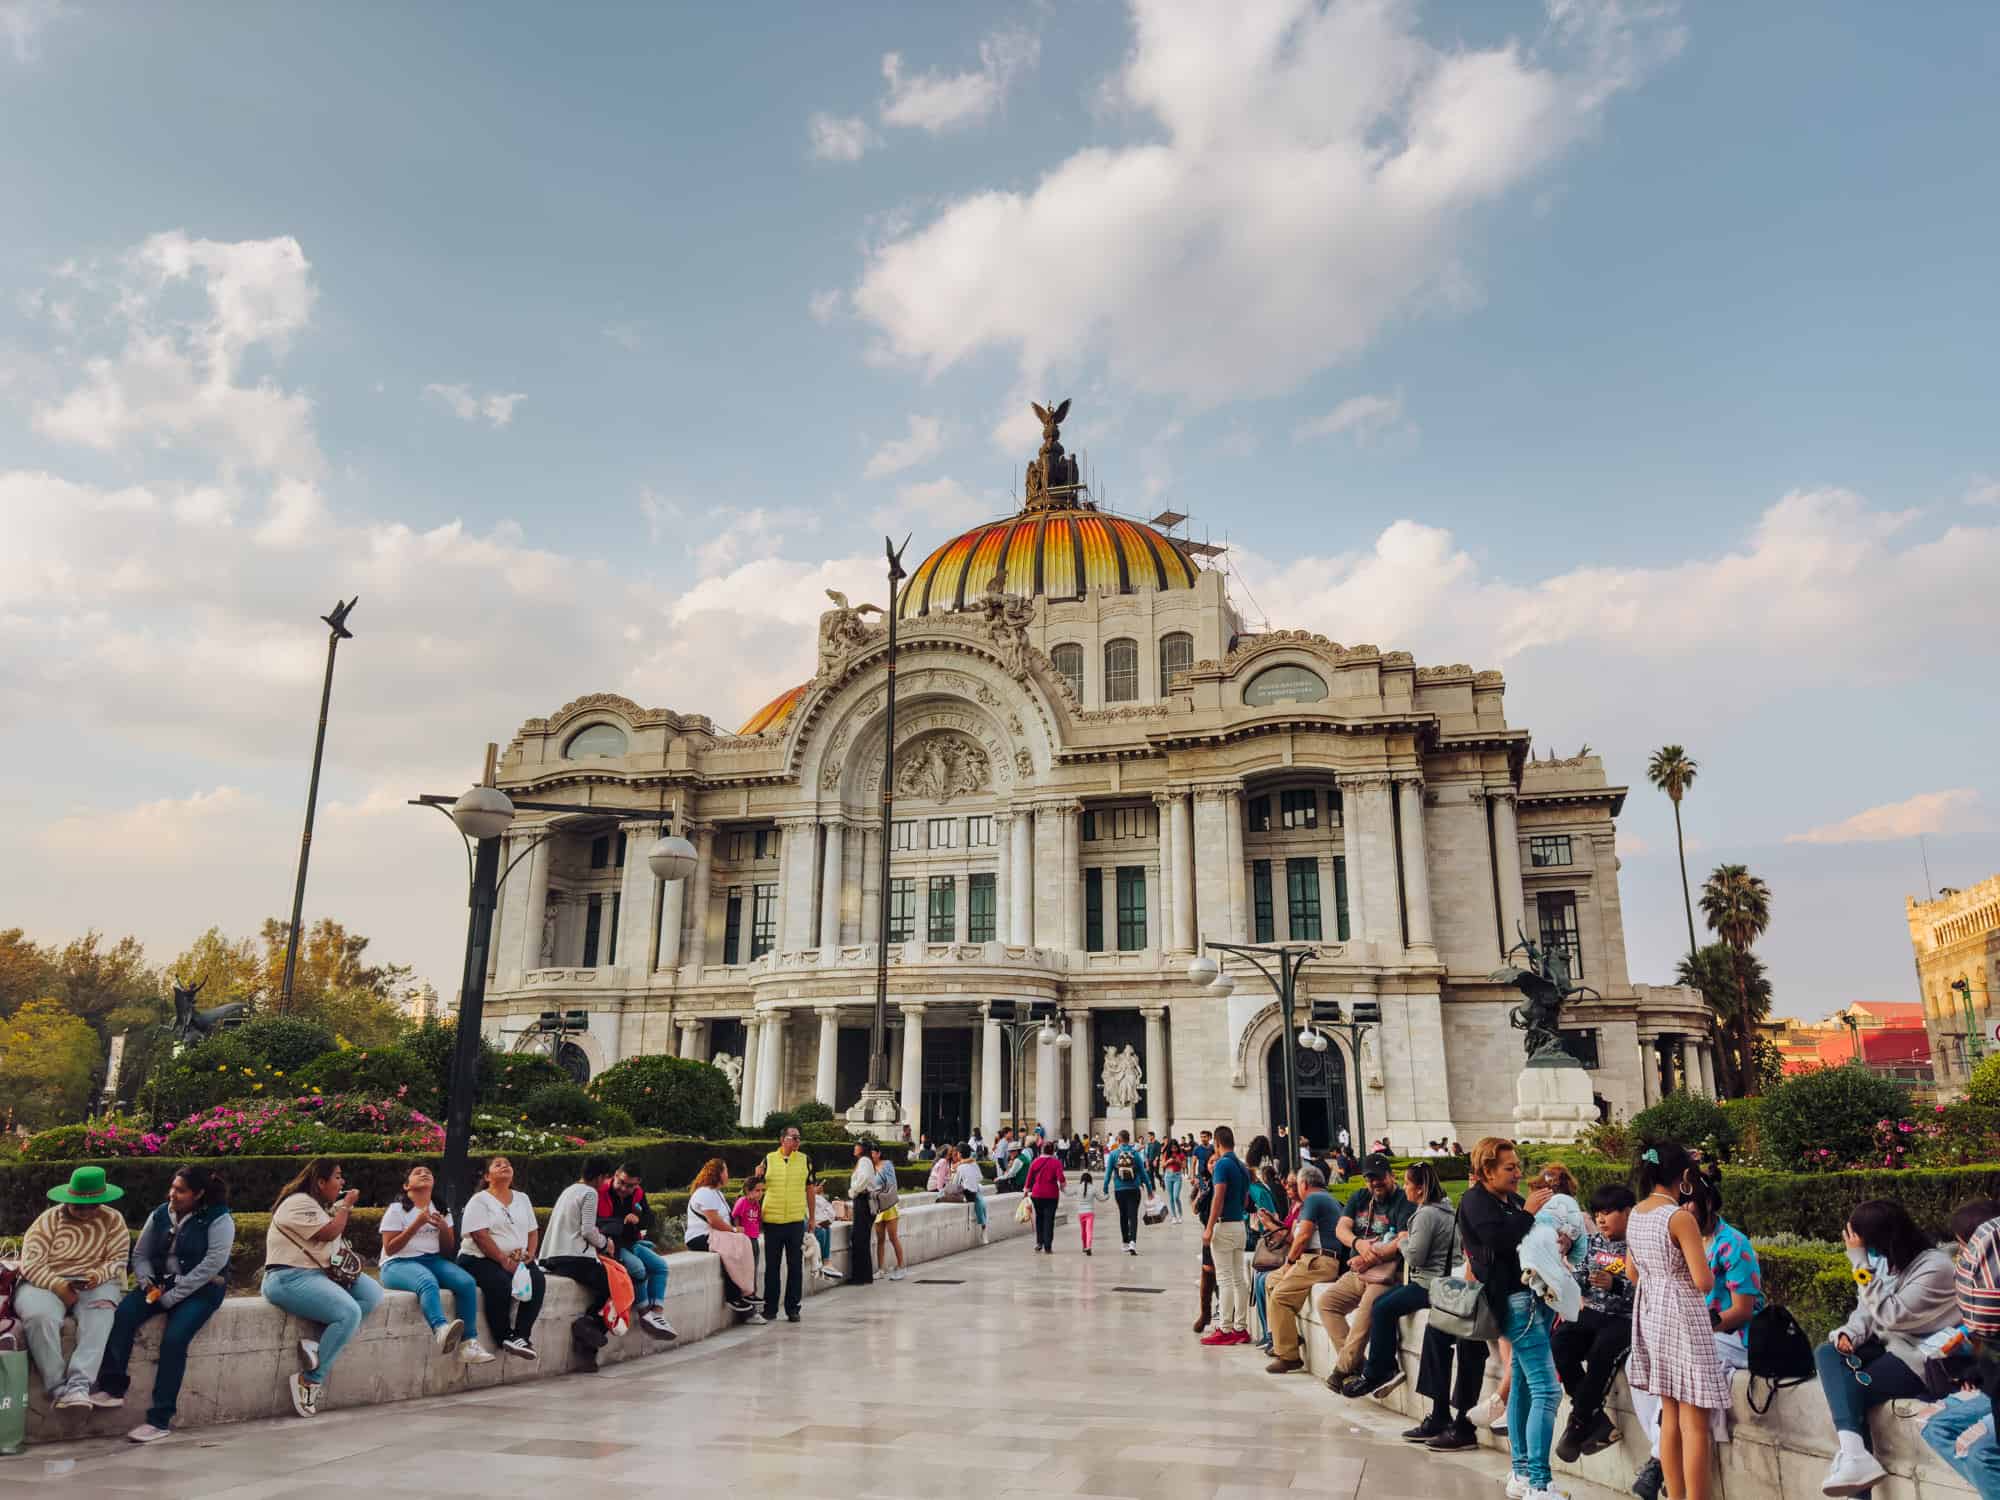 Mexico Travel: What To Do in Polanco, Mexico City: Our Guide